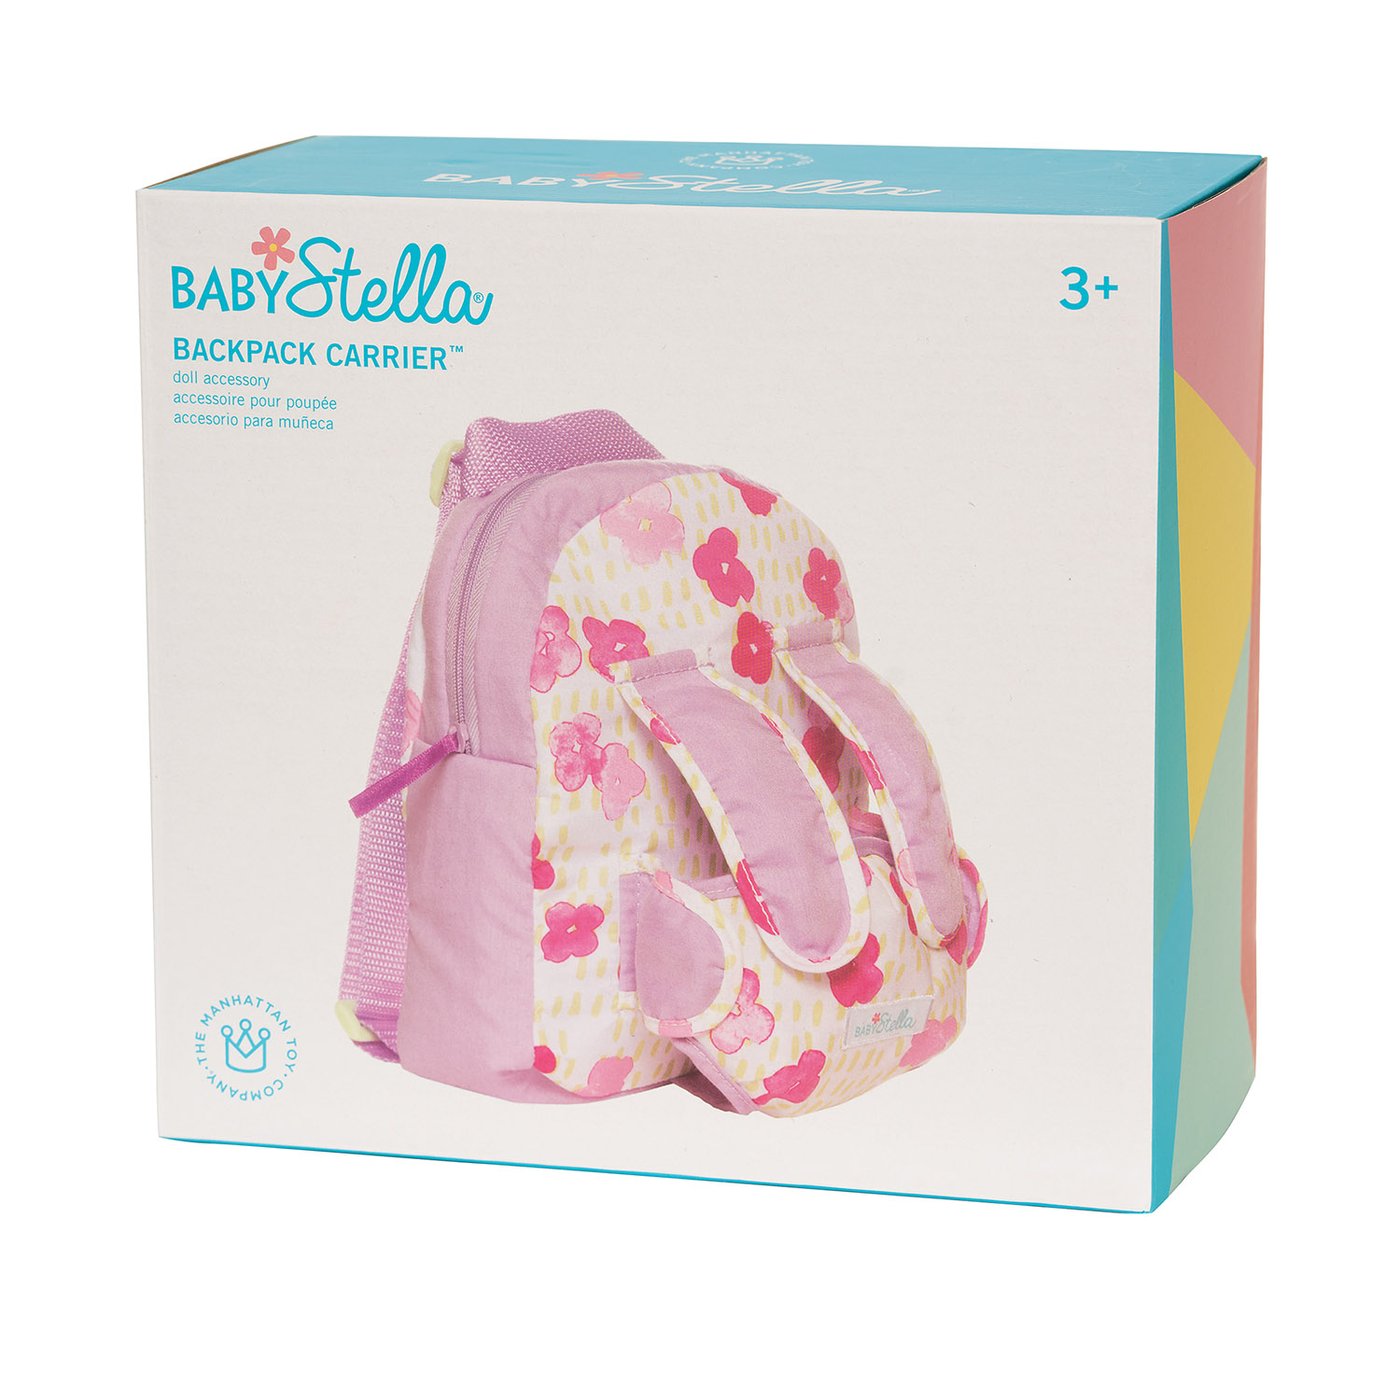 Baby Stella Backpack Carrier    